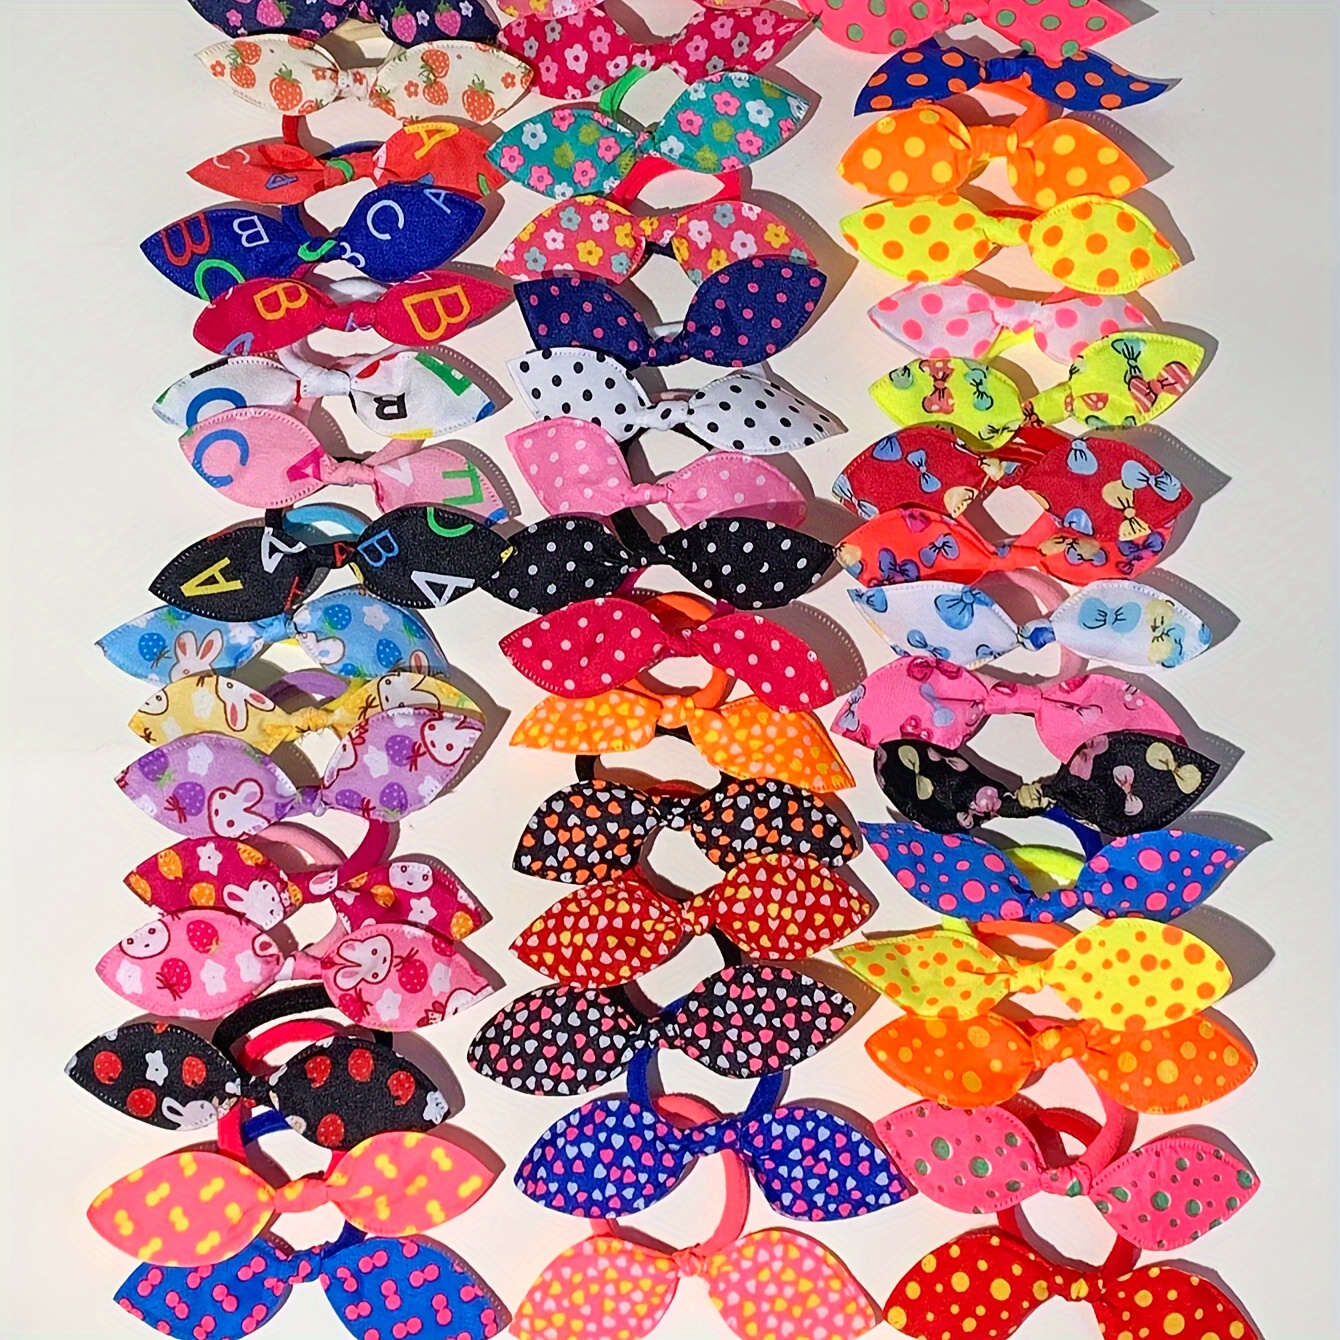 

50-piece Vintage Bow Hair Ties For Girls - Colorful Elastic Bands, Cute Hair Accessories